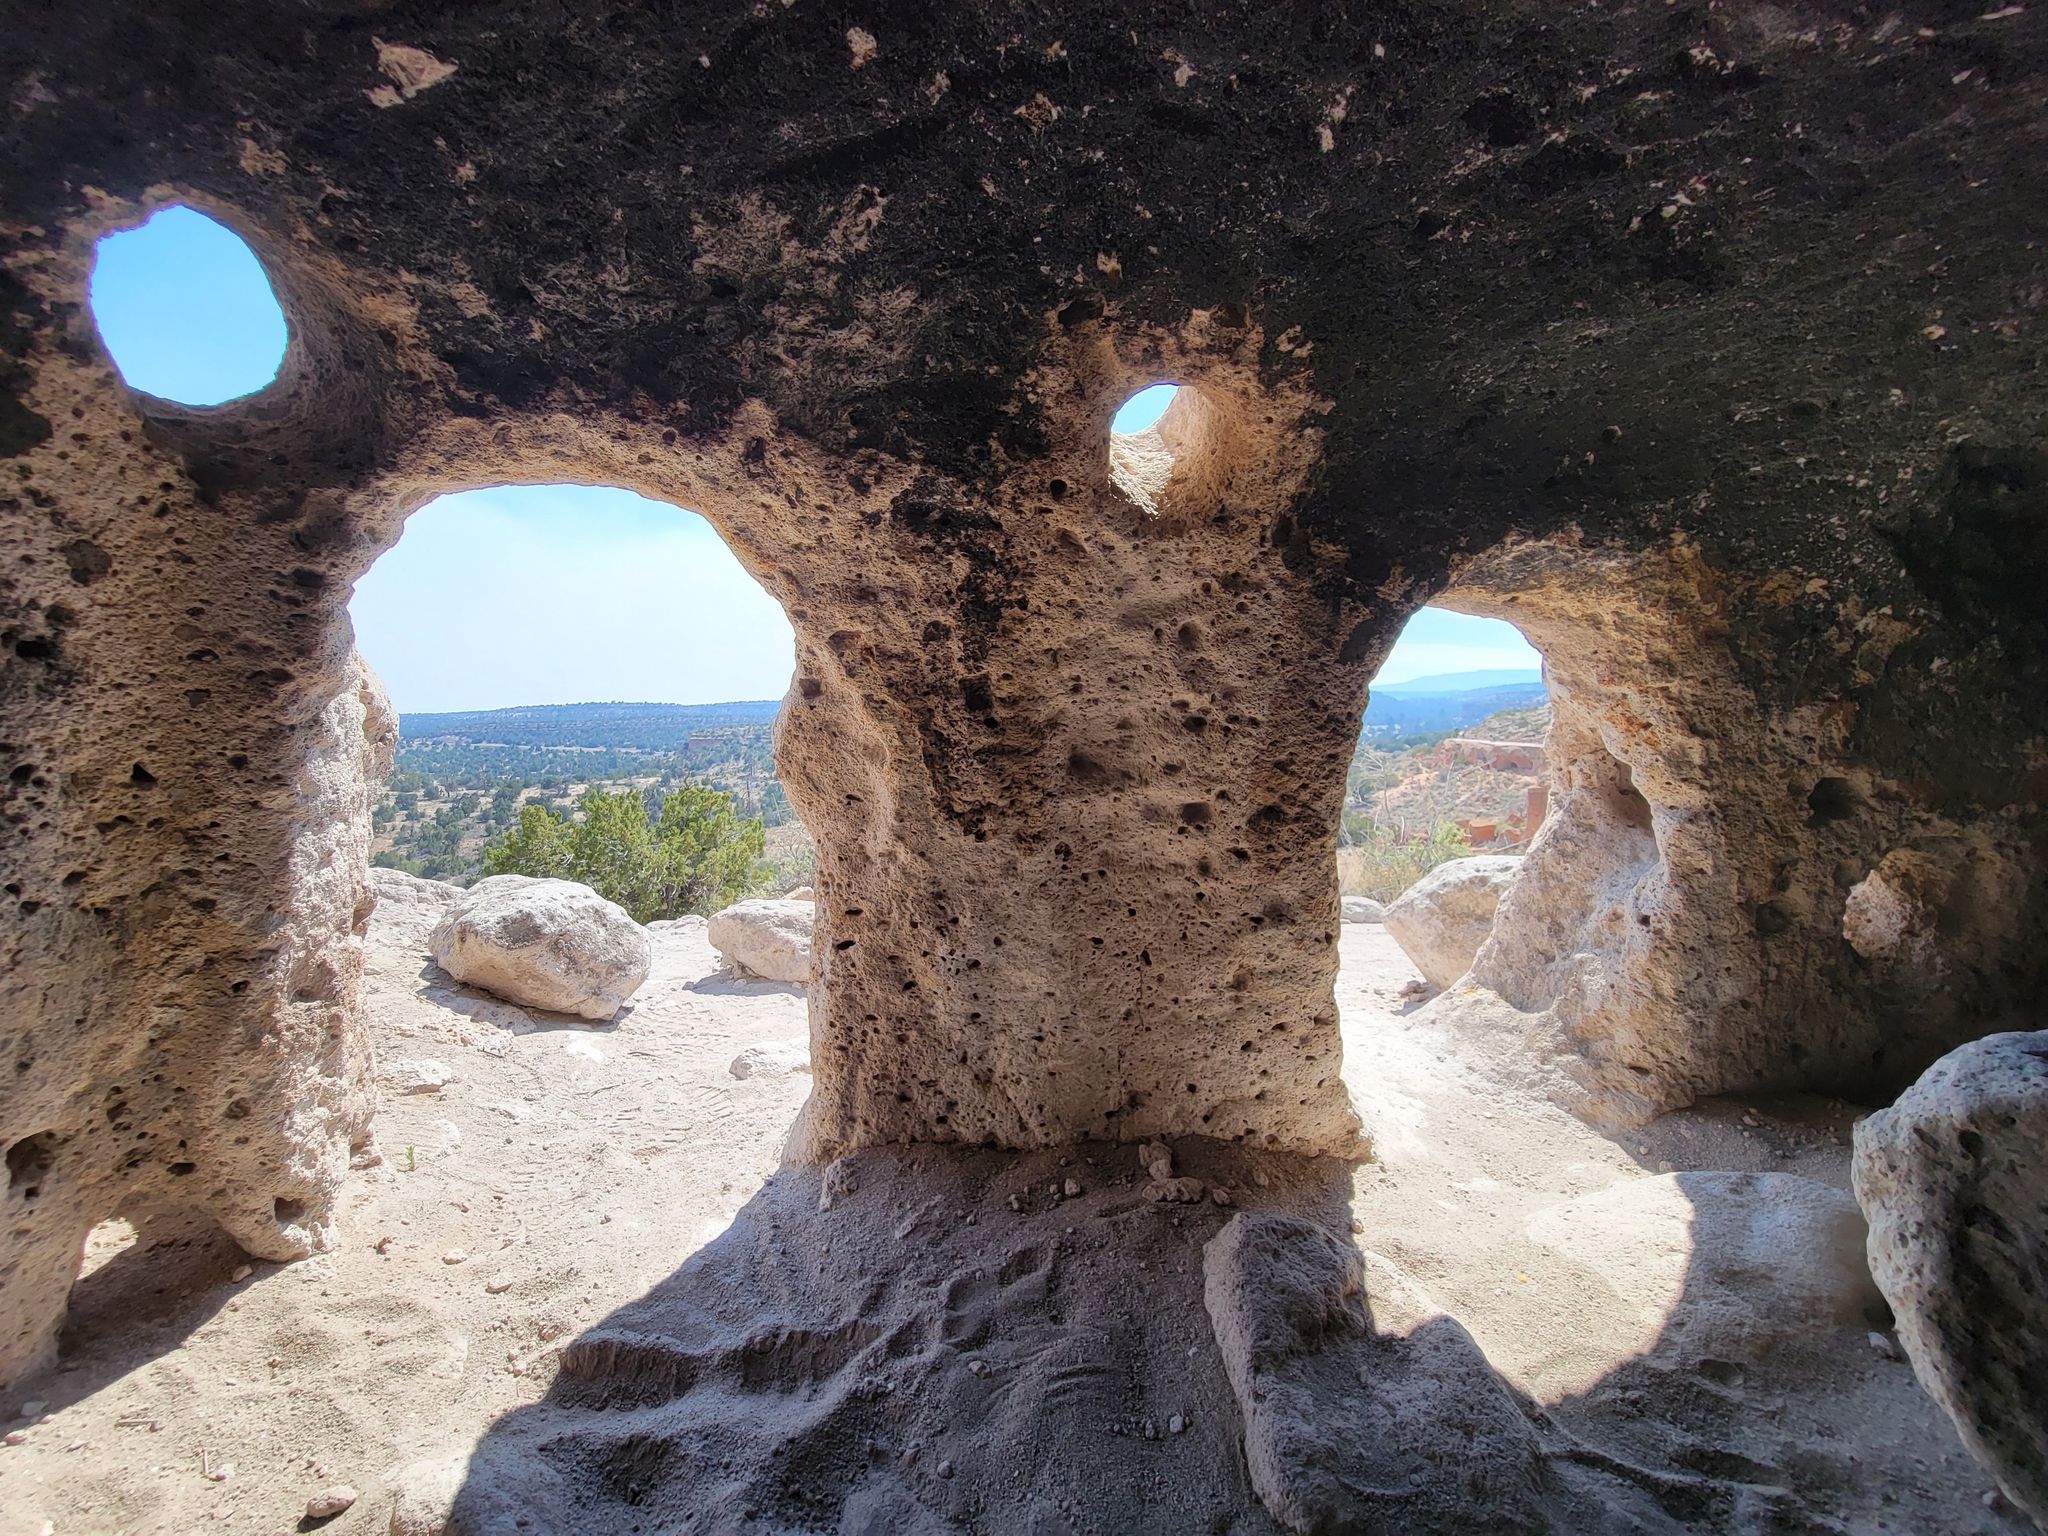 There are plenty of hiking trail options in Bandelier National Monument, including the Tsankawi Ruins Trail santa fe new mexico